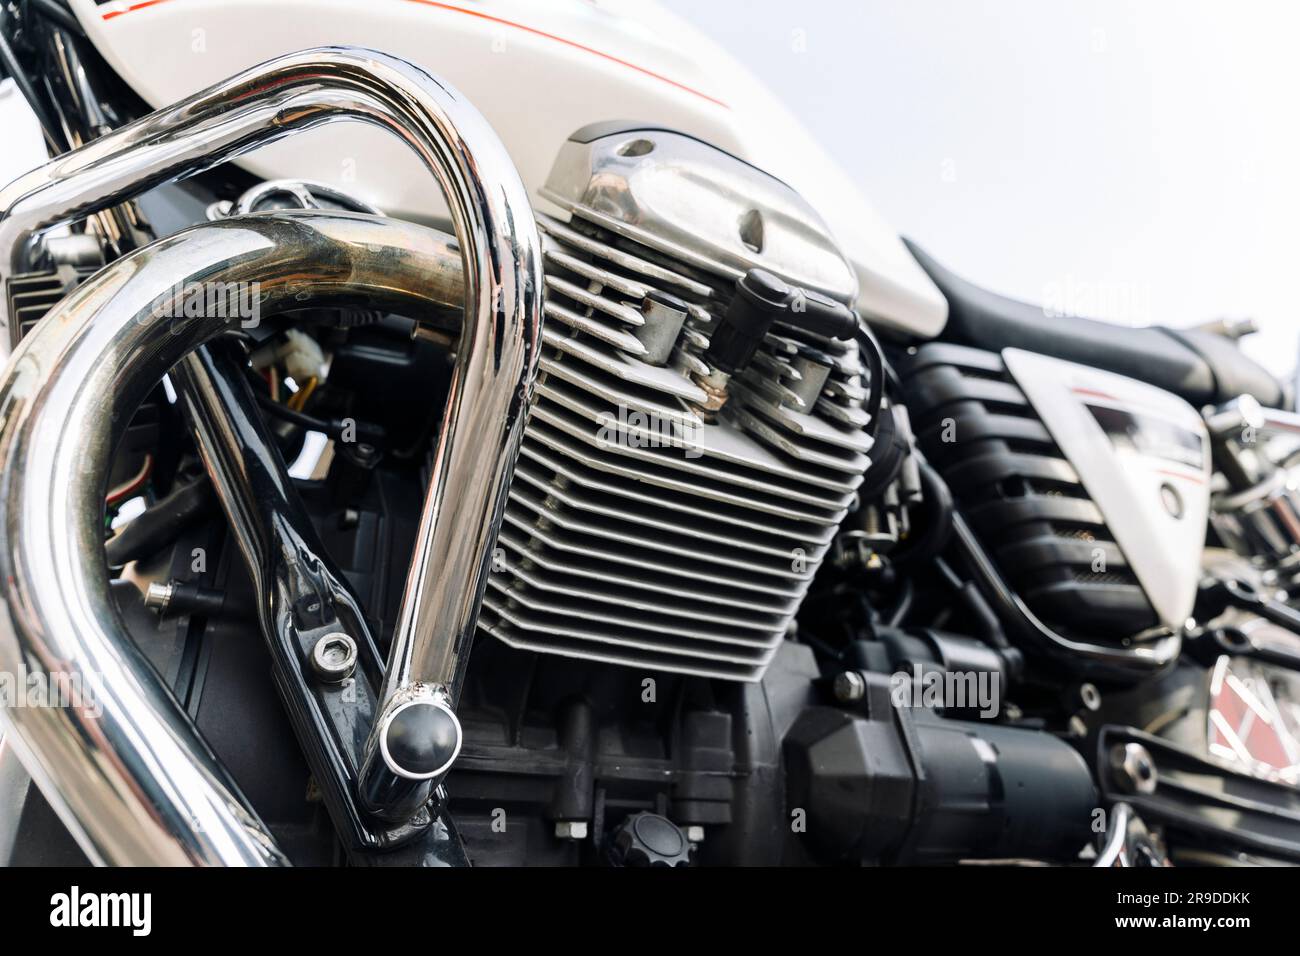 The engine of a classic motorcycle. side view. motor, cylinders, cooling fins Stock Photo